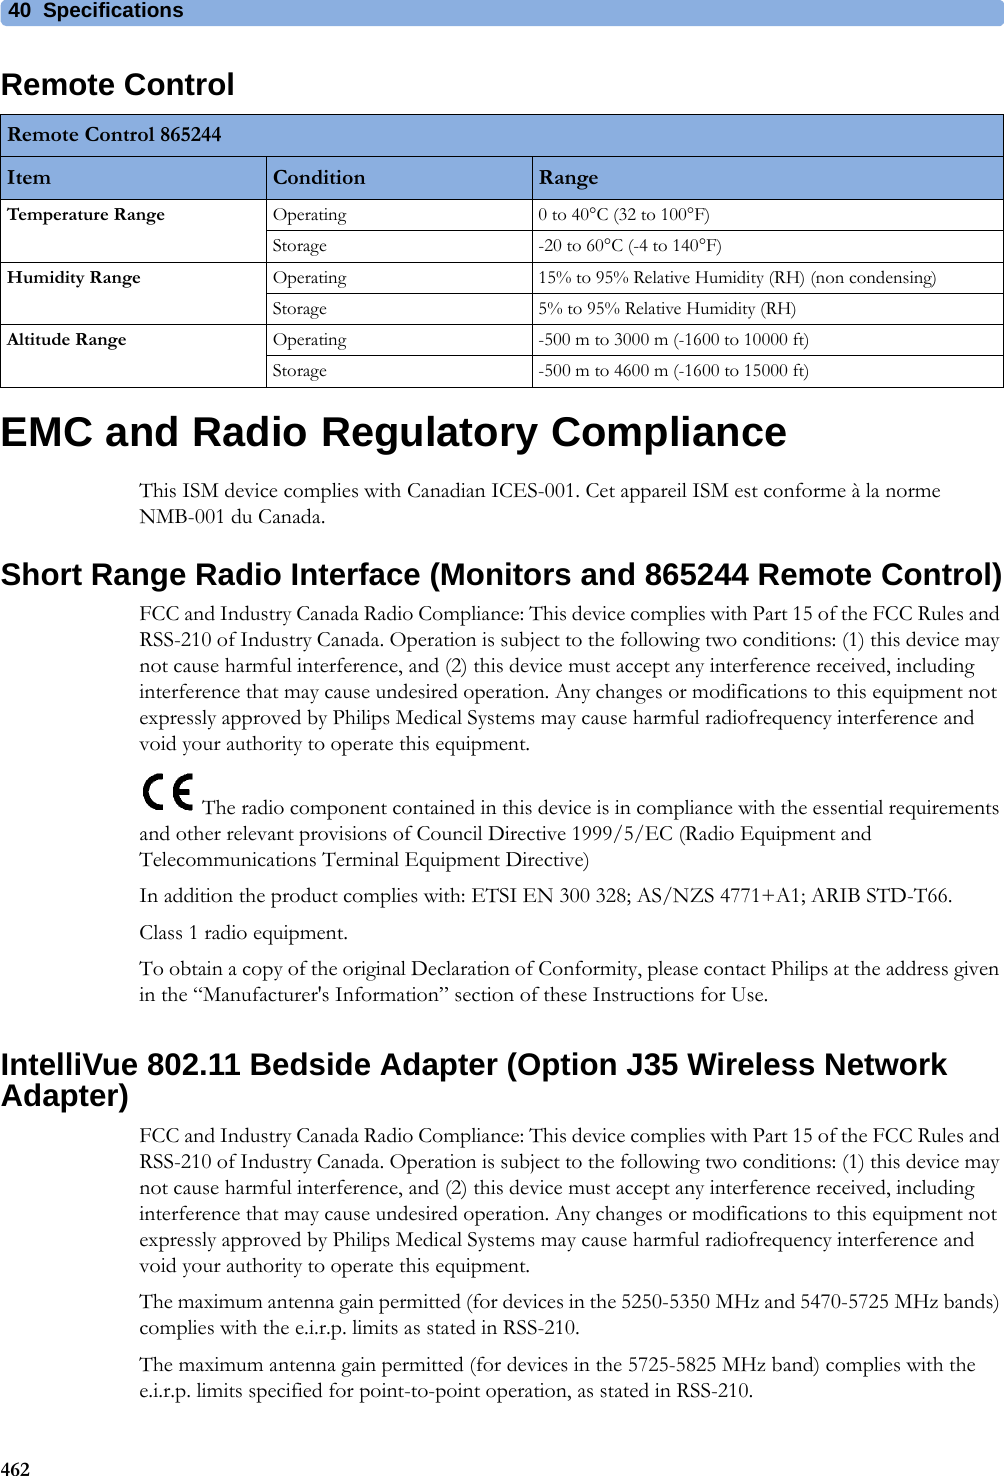 40 Specifications462Remote ControlEMC and Radio Regulatory ComplianceThis ISM device complies with Canadian ICES-001. Cet appareil ISM est conforme à la norme NMB-001 du Canada.Short Range Radio Interface (Monitors and 865244 Remote Control)FCC and Industry Canada Radio Compliance: This device complies with Part 15 of the FCC Rules and RSS-210 of Industry Canada. Operation is subject to the following two conditions: (1) this device may not cause harmful interference, and (2) this device must accept any interference received, including interference that may cause undesired operation. Any changes or modifications to this equipment not expressly approved by Philips Medical Systems may cause harmful radiofrequency interference and void your authority to operate this equipment. The radio component contained in this device is in compliance with the essential requirements and other relevant provisions of Council Directive 1999/5/EC (Radio Equipment and Telecommunications Terminal Equipment Directive)In addition the product complies with: ETSI EN 300 328; AS/NZS 4771+A1; ARIB STD-T66.Class 1 radio equipment.To obtain a copy of the original Declaration of Conformity, please contact Philips at the address given in the “Manufacturer&apos;s Information” section of these Instructions for Use.IntelliVue 802.11 Bedside Adapter (Option J35 Wireless Network Adapter)FCC and Industry Canada Radio Compliance: This device complies with Part 15 of the FCC Rules and RSS-210 of Industry Canada. Operation is subject to the following two conditions: (1) this device may not cause harmful interference, and (2) this device must accept any interference received, including interference that may cause undesired operation. Any changes or modifications to this equipment not expressly approved by Philips Medical Systems may cause harmful radiofrequency interference and void your authority to operate this equipment.The maximum antenna gain permitted (for devices in the 5250-5350 MHz and 5470-5725 MHz bands) complies with the e.i.r.p. limits as stated in RSS-210.The maximum antenna gain permitted (for devices in the 5725-5825 MHz band) complies with the e.i.r.p. limits specified for point-to-point operation, as stated in RSS-210.Remote Control 865244Item Condition RangeTemperature Range Operating 0 to 40°C (32 to 100°F)Storage -20 to 60°C (-4 to 140°F)Humidity Range Operating 15% to 95% Relative Humidity (RH) (non condensing)Storage 5% to 95% Relative Humidity (RH)Altitude Range Operating -500 m to 3000 m (-1600 to 10000 ft)Storage -500 m to 4600 m (-1600 to 15000 ft)